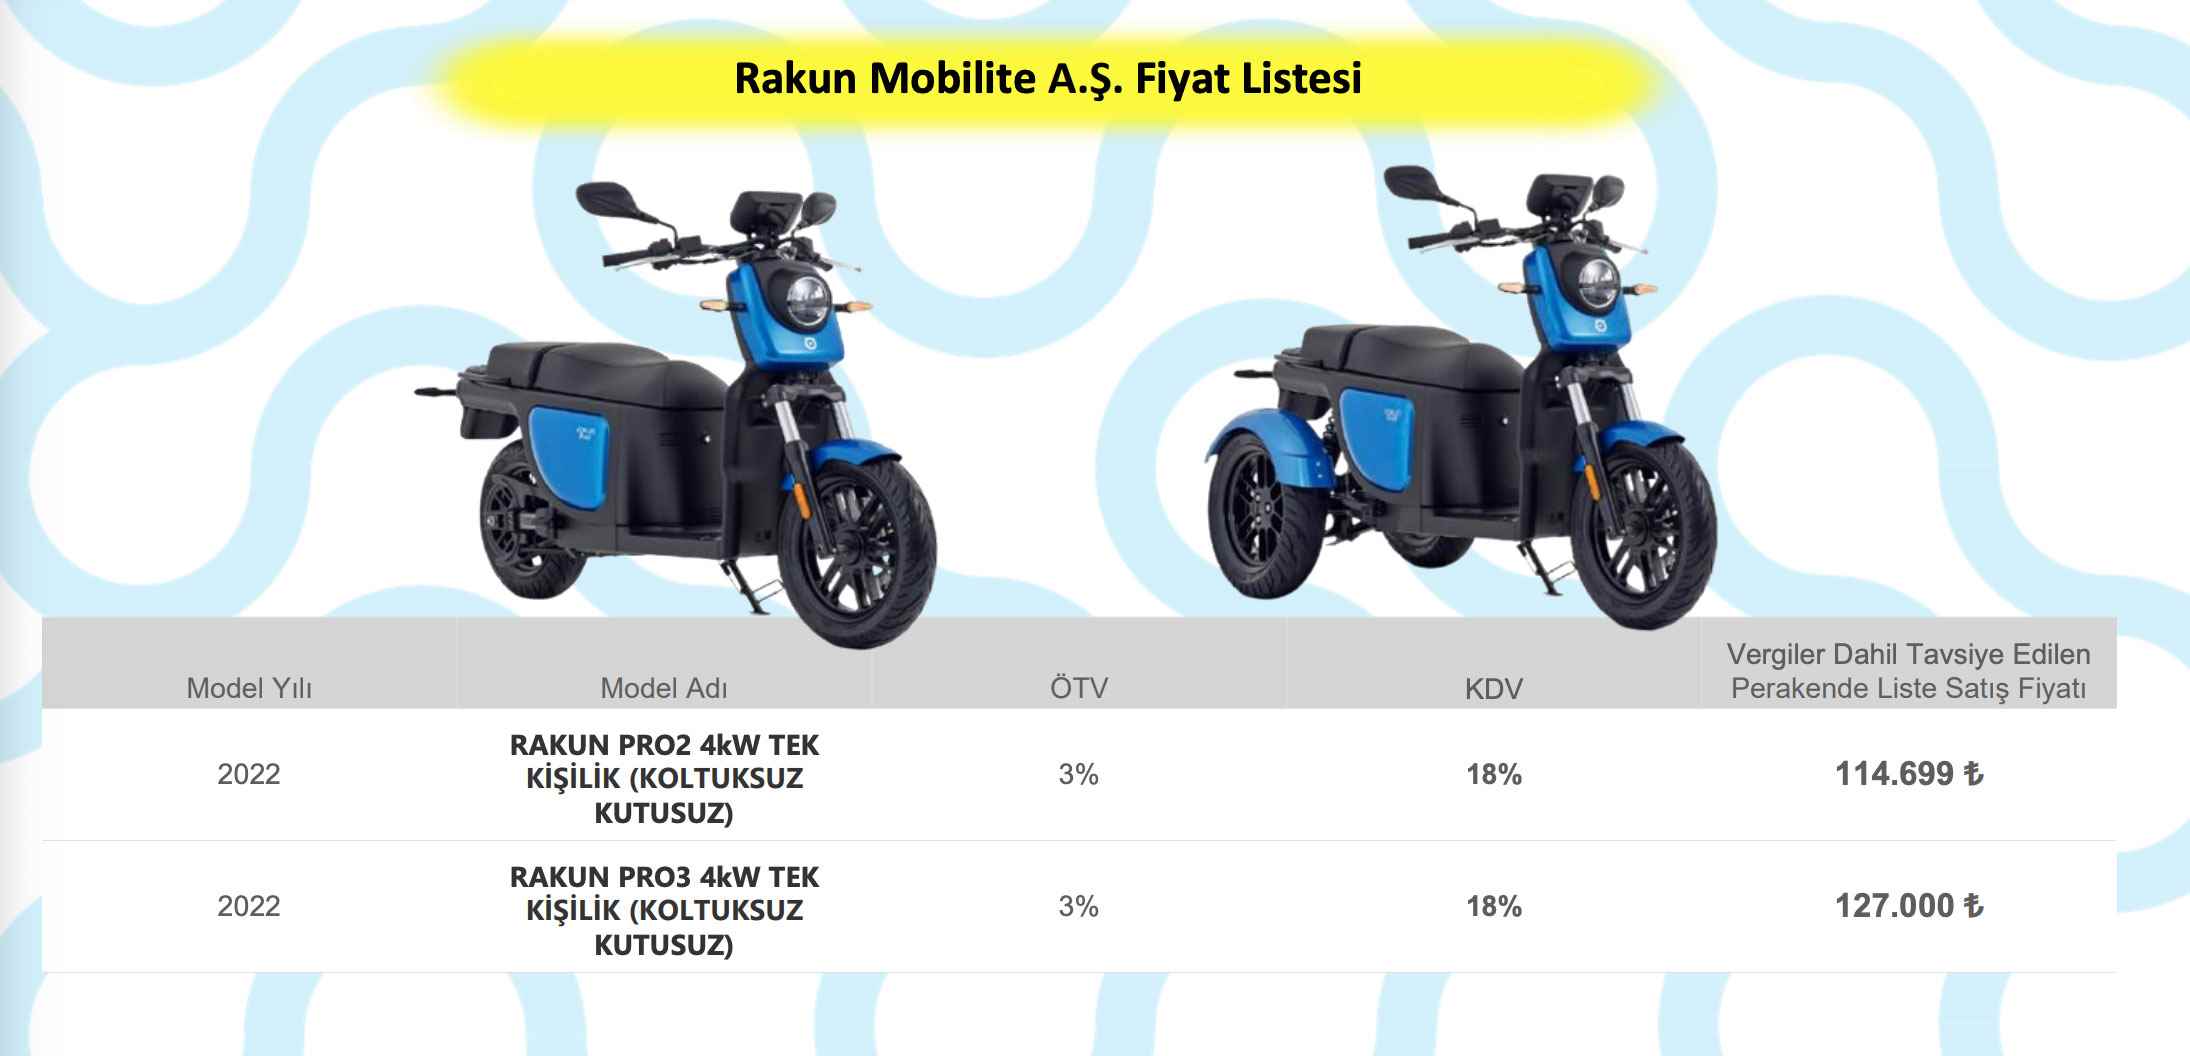 A new hike has arrived for domestic electric motorcycles Raccoon